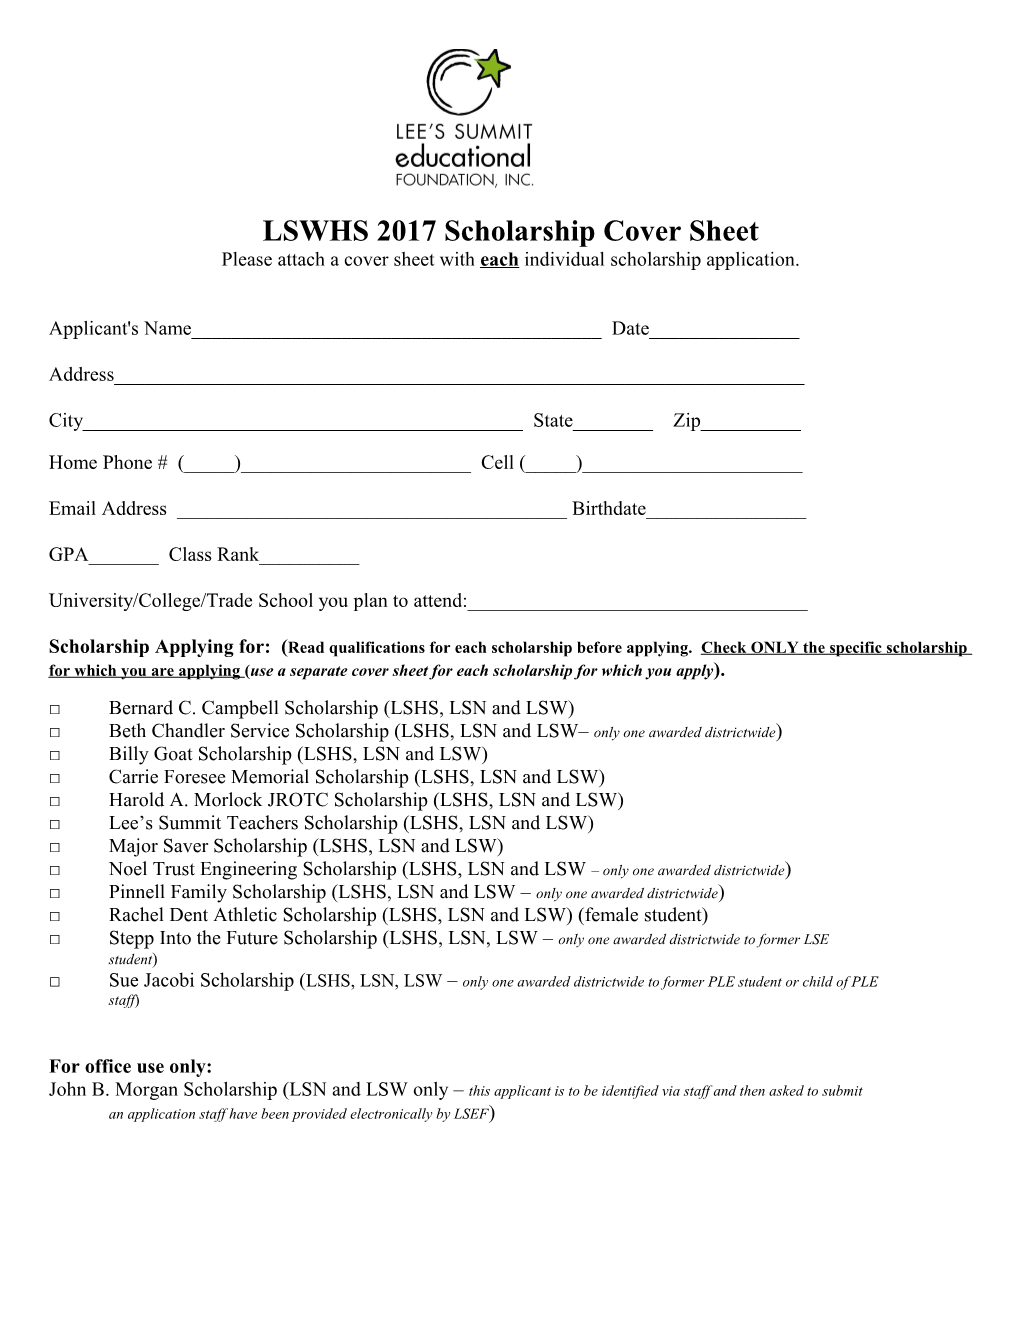 LSWHS 2017 Scholarship Cover Sheet